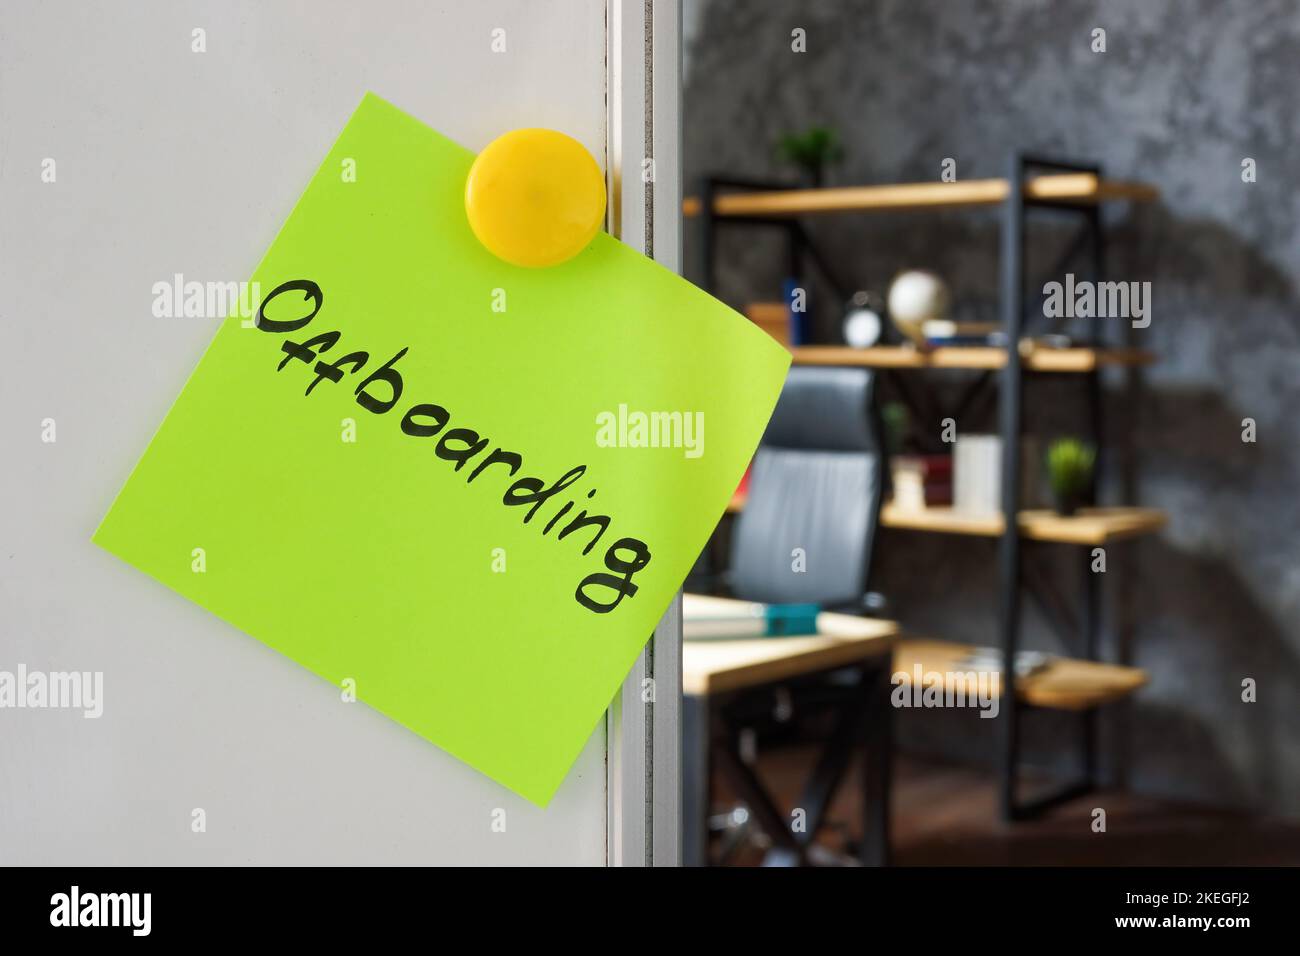 Sticker with word offboarding pinned on the whiteboard. Stock Photo